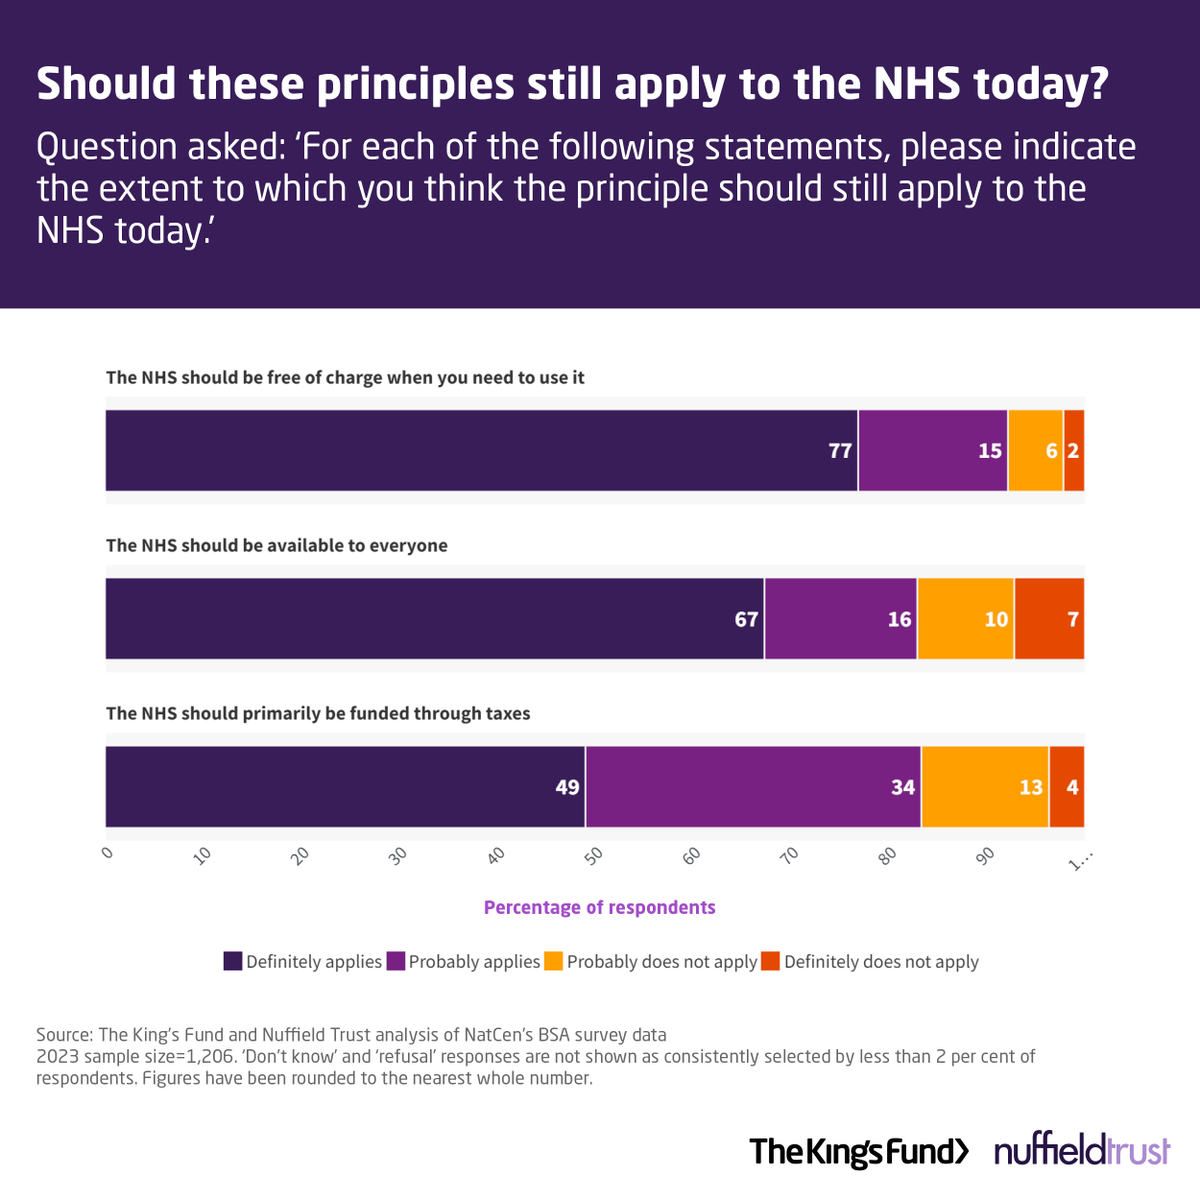 Despite low public satisfaction with the #NHS, the public still believe in the founding principles of the service, and a majority agree that the NHS should be available to all, free, and primarily funded through taxes. Explore more in our latest report ➡️ kingsfund.org.uk/insight-and-an…